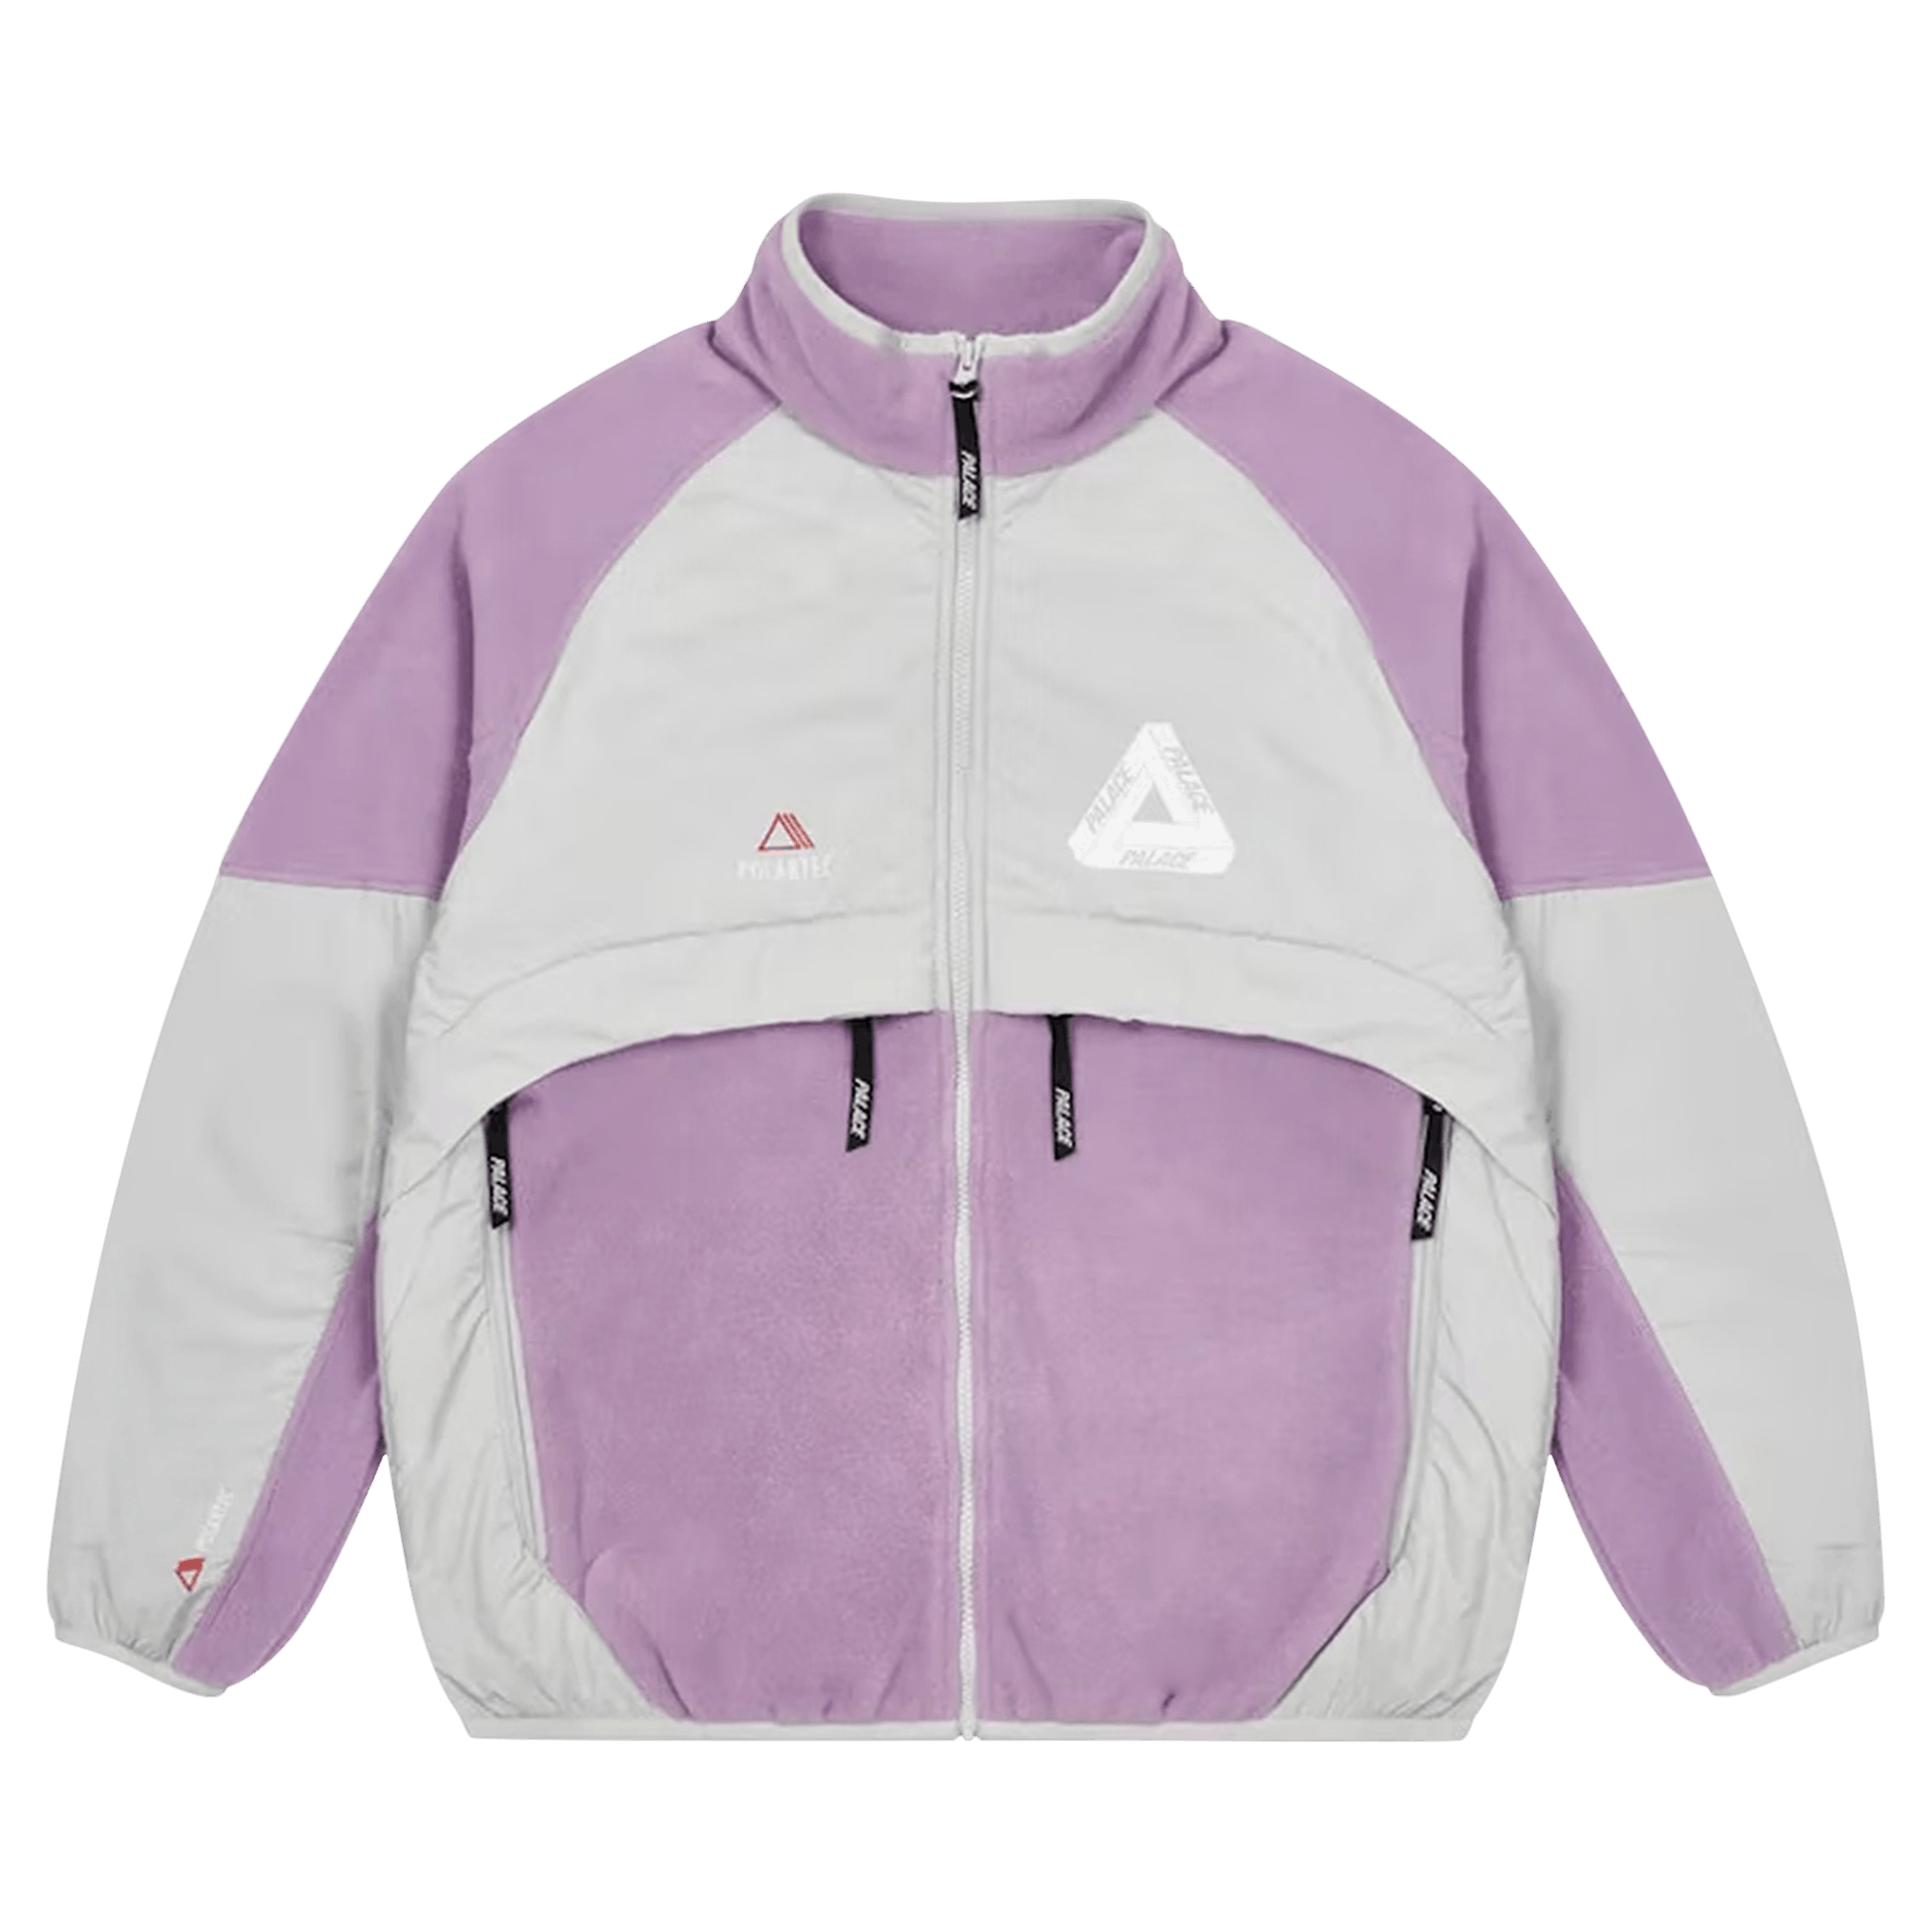 Palace Polartec Shell Jacket 'pink/grey' In Multi-color